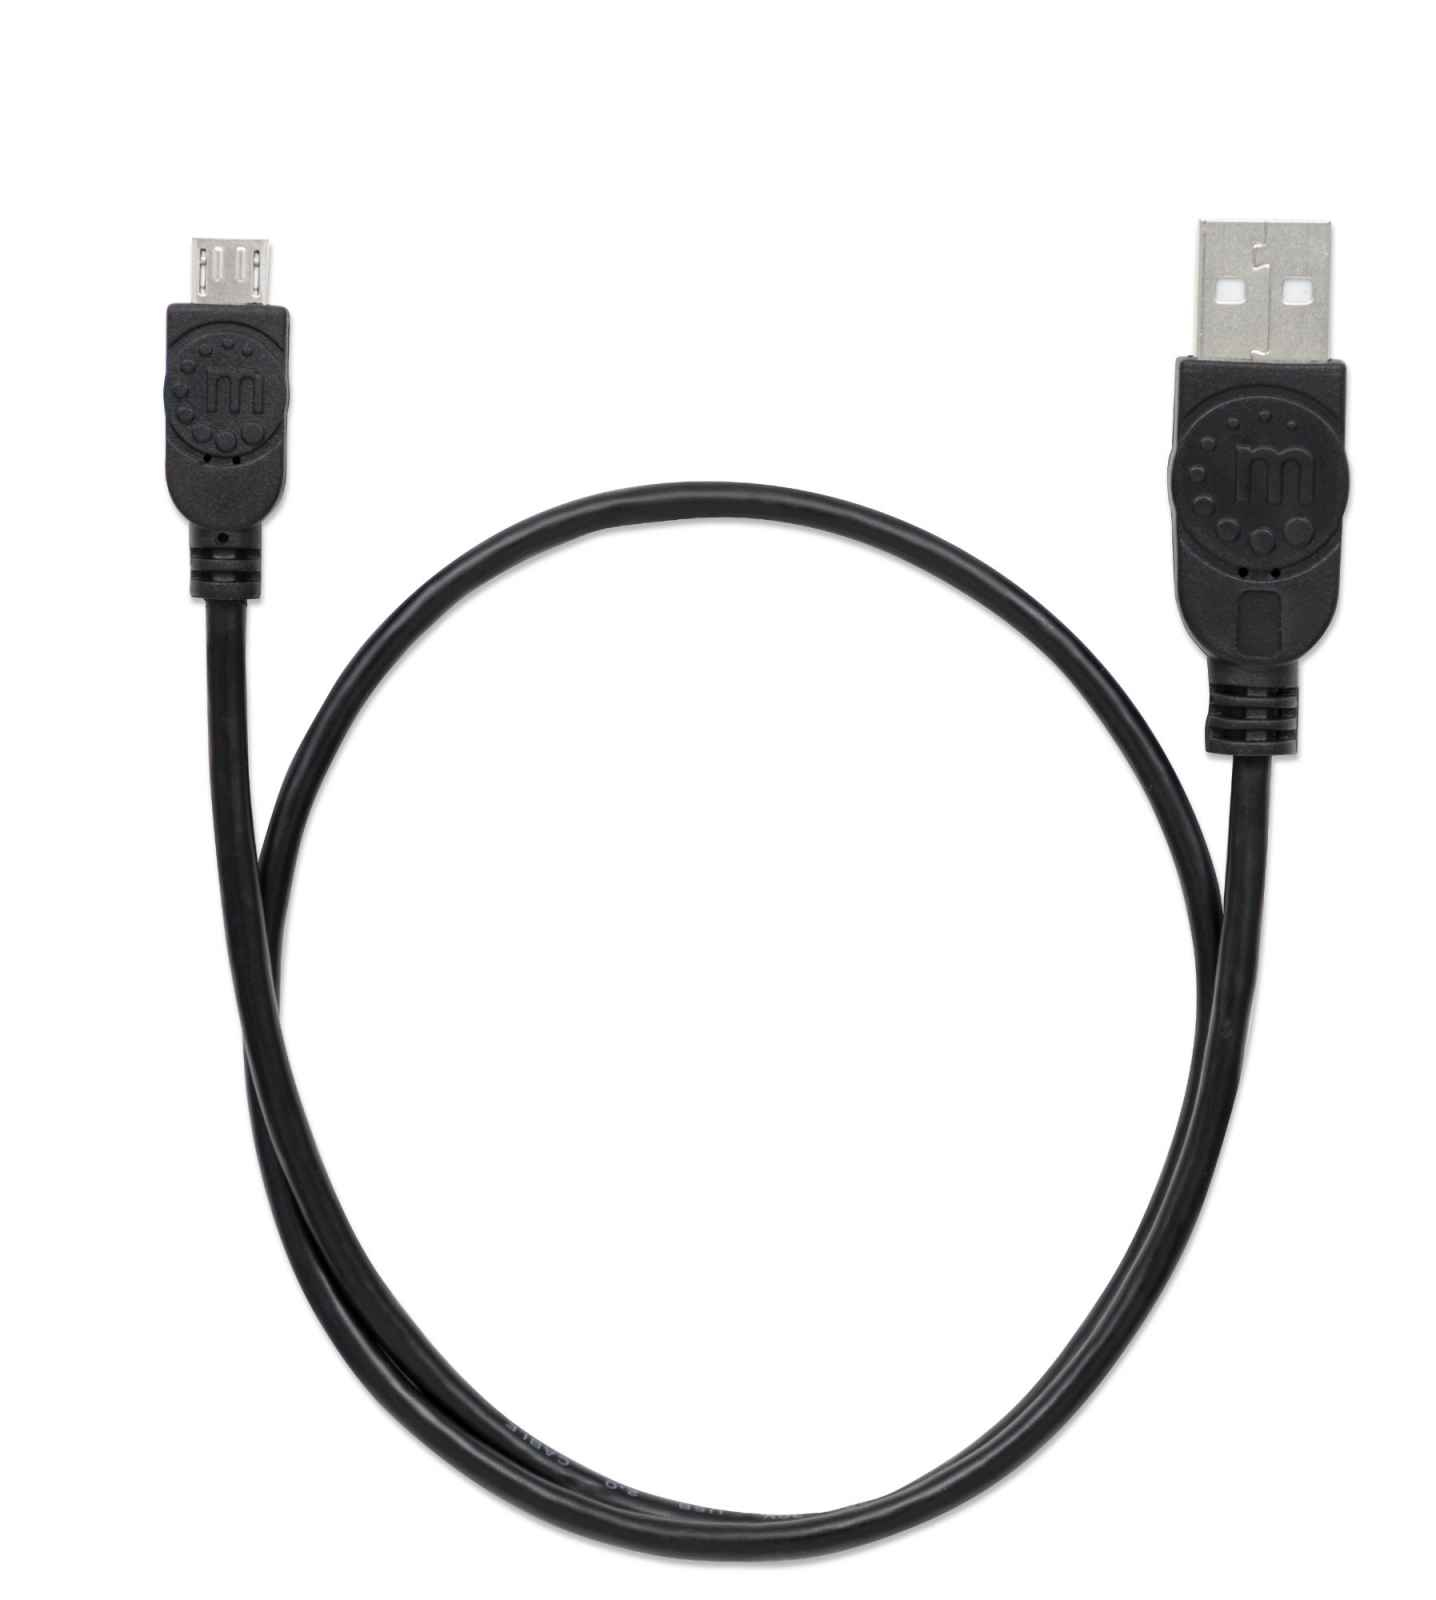 Manhattan USB-A to Micro-USB Cable, 0.5m, Male to Male, 480 Mbps (USB 2.0), Black, Polybag